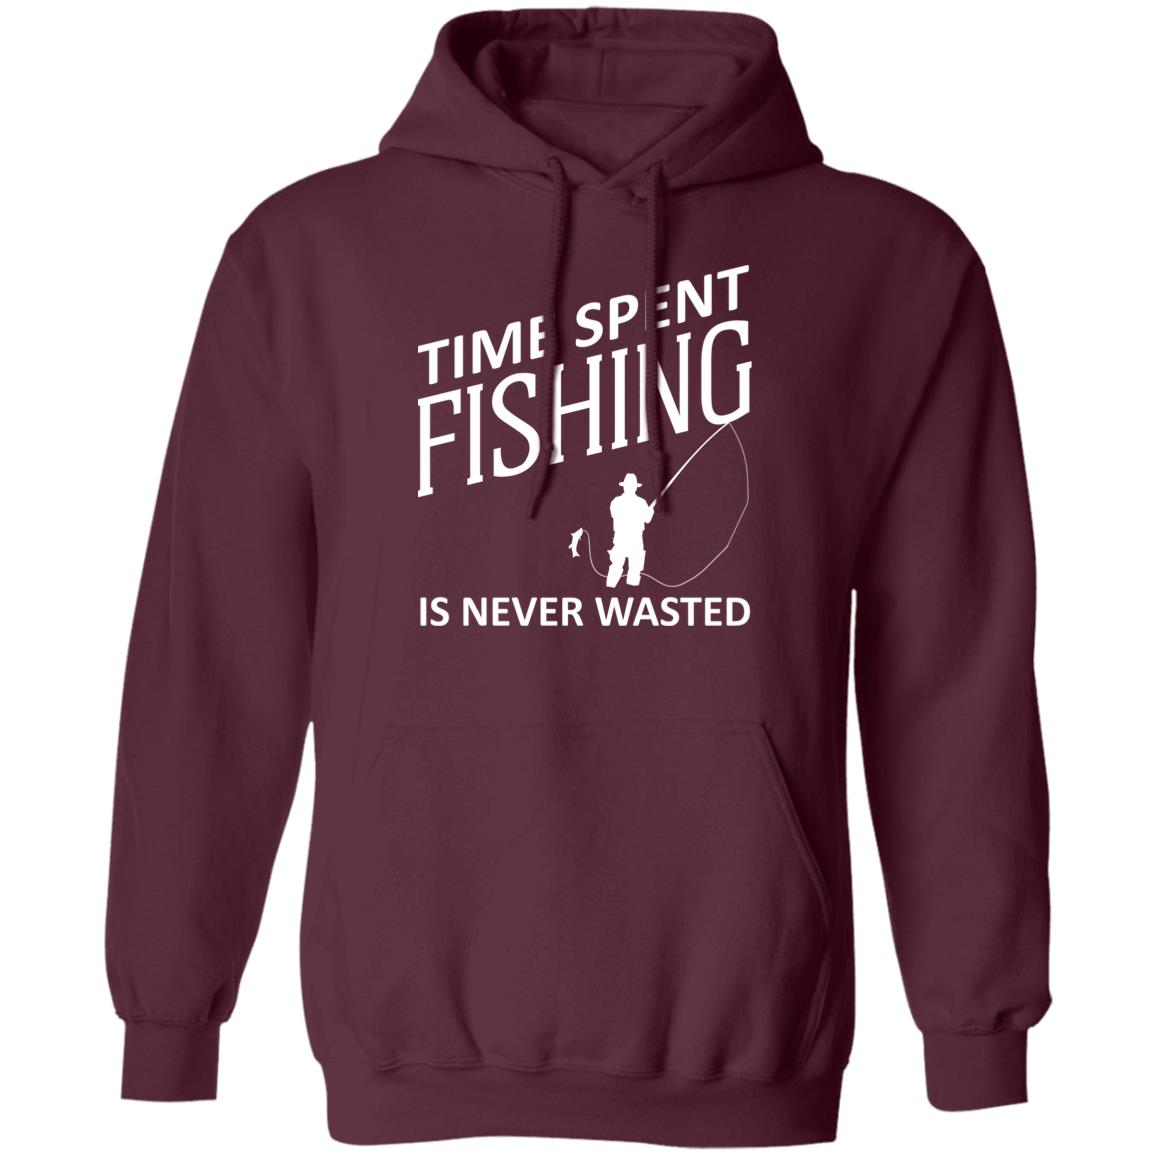 Time spent fishing pullover hoodie maroon-w